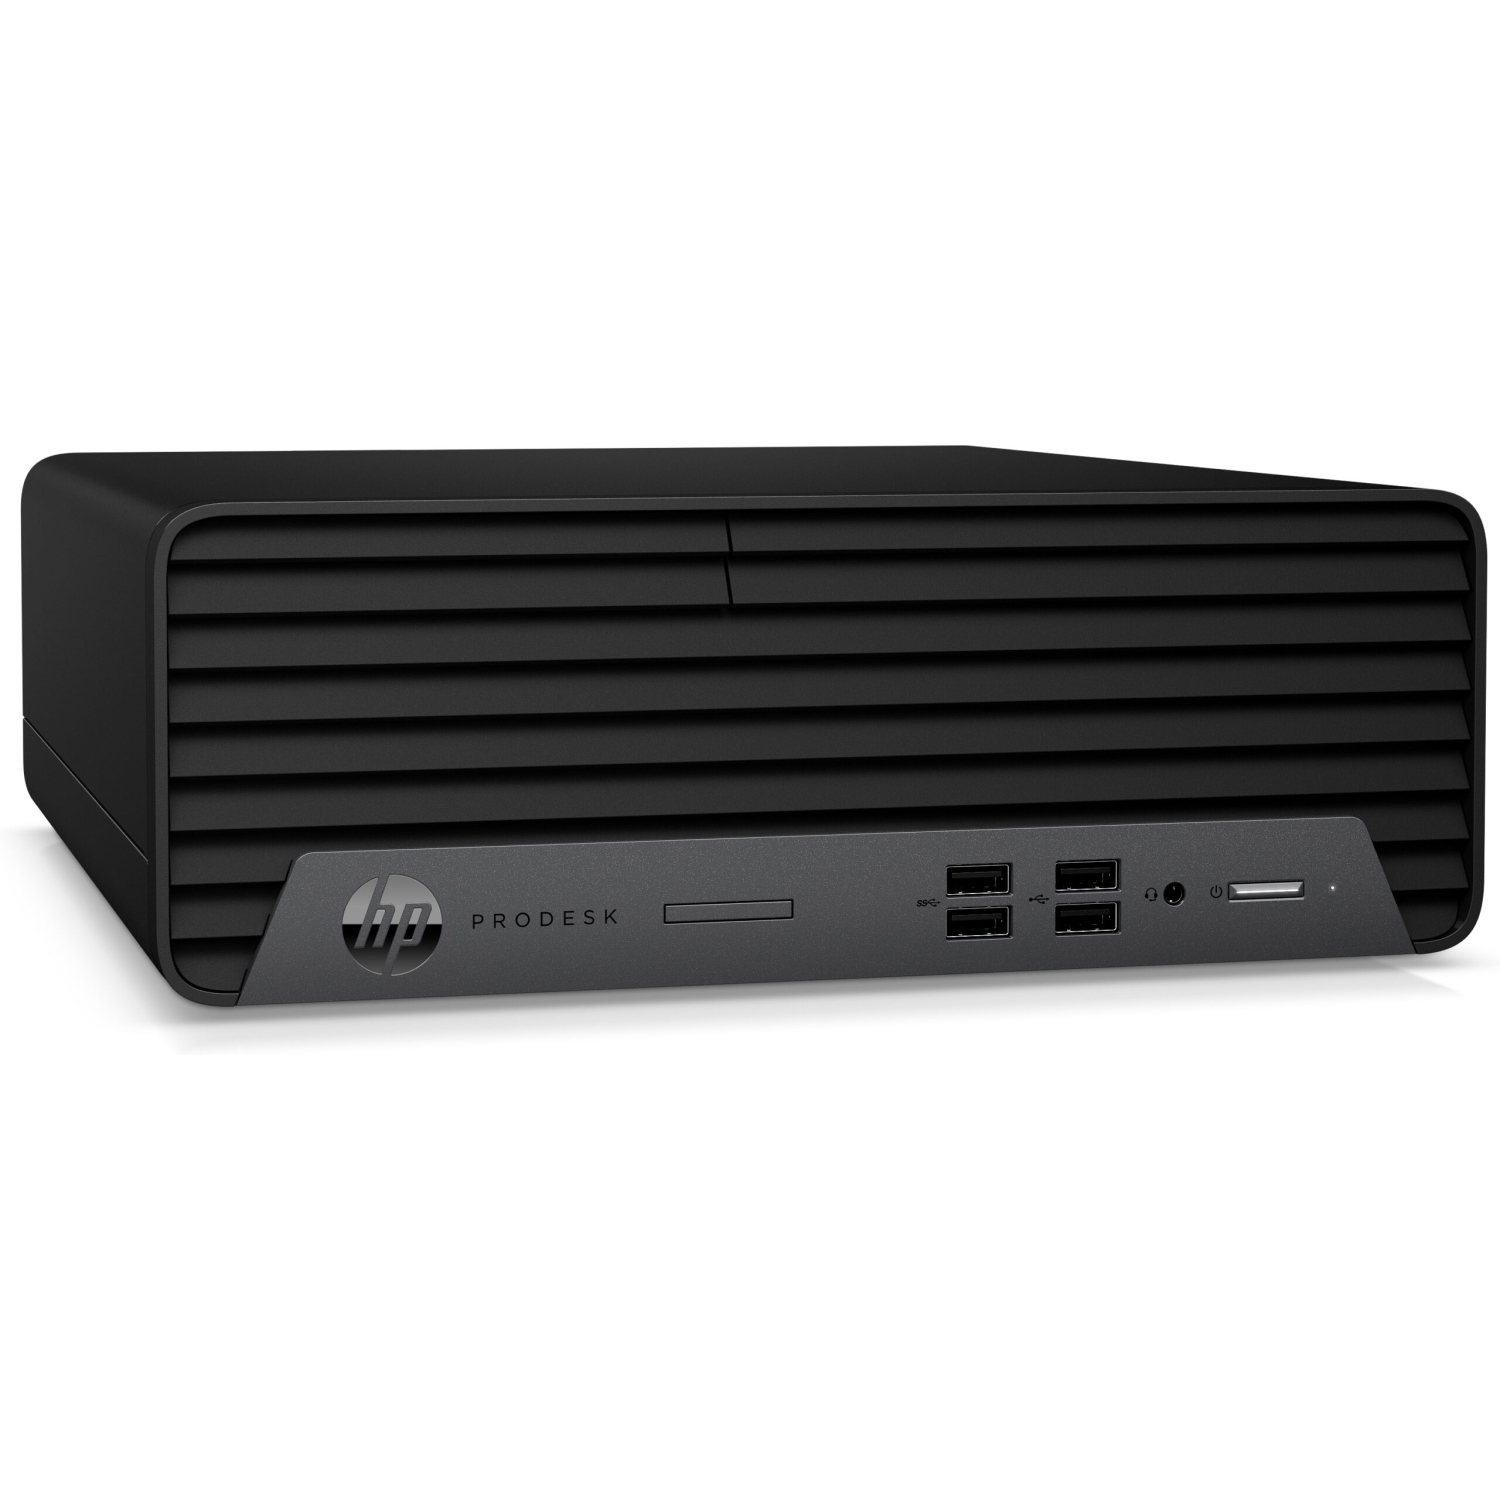 Refurbished(Good) HP ProDesk 400 G7 SFF - Intel i7-10700, 16 GB RAM, 1 TB SSD, WIN 10 Pro Upgradable to Win 11 Pro. Grade A & very good condition